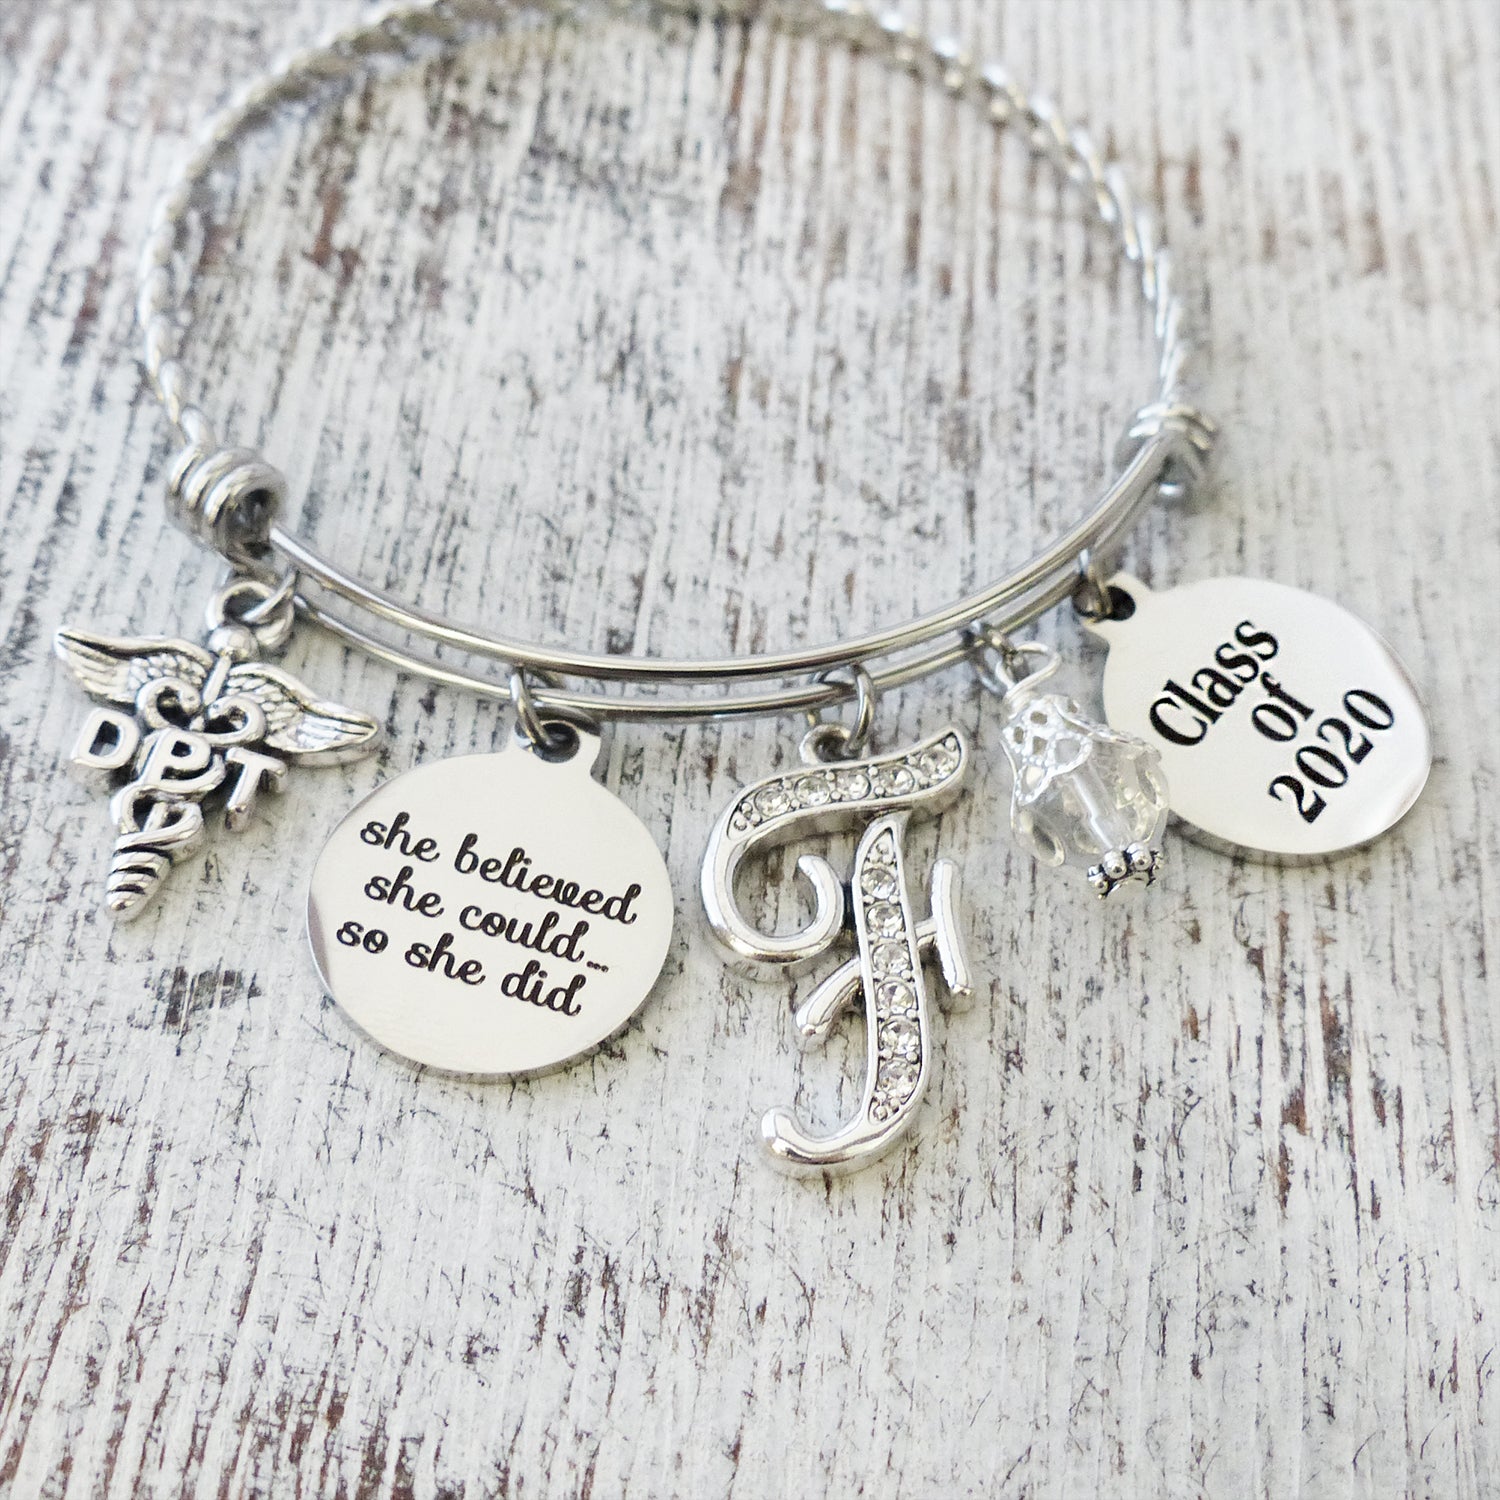 Class of 2023 DPT Graduation Gifts, Personalized She believed she could so she did jewelry gifts, Graduation Bracelet, College Grad Gift